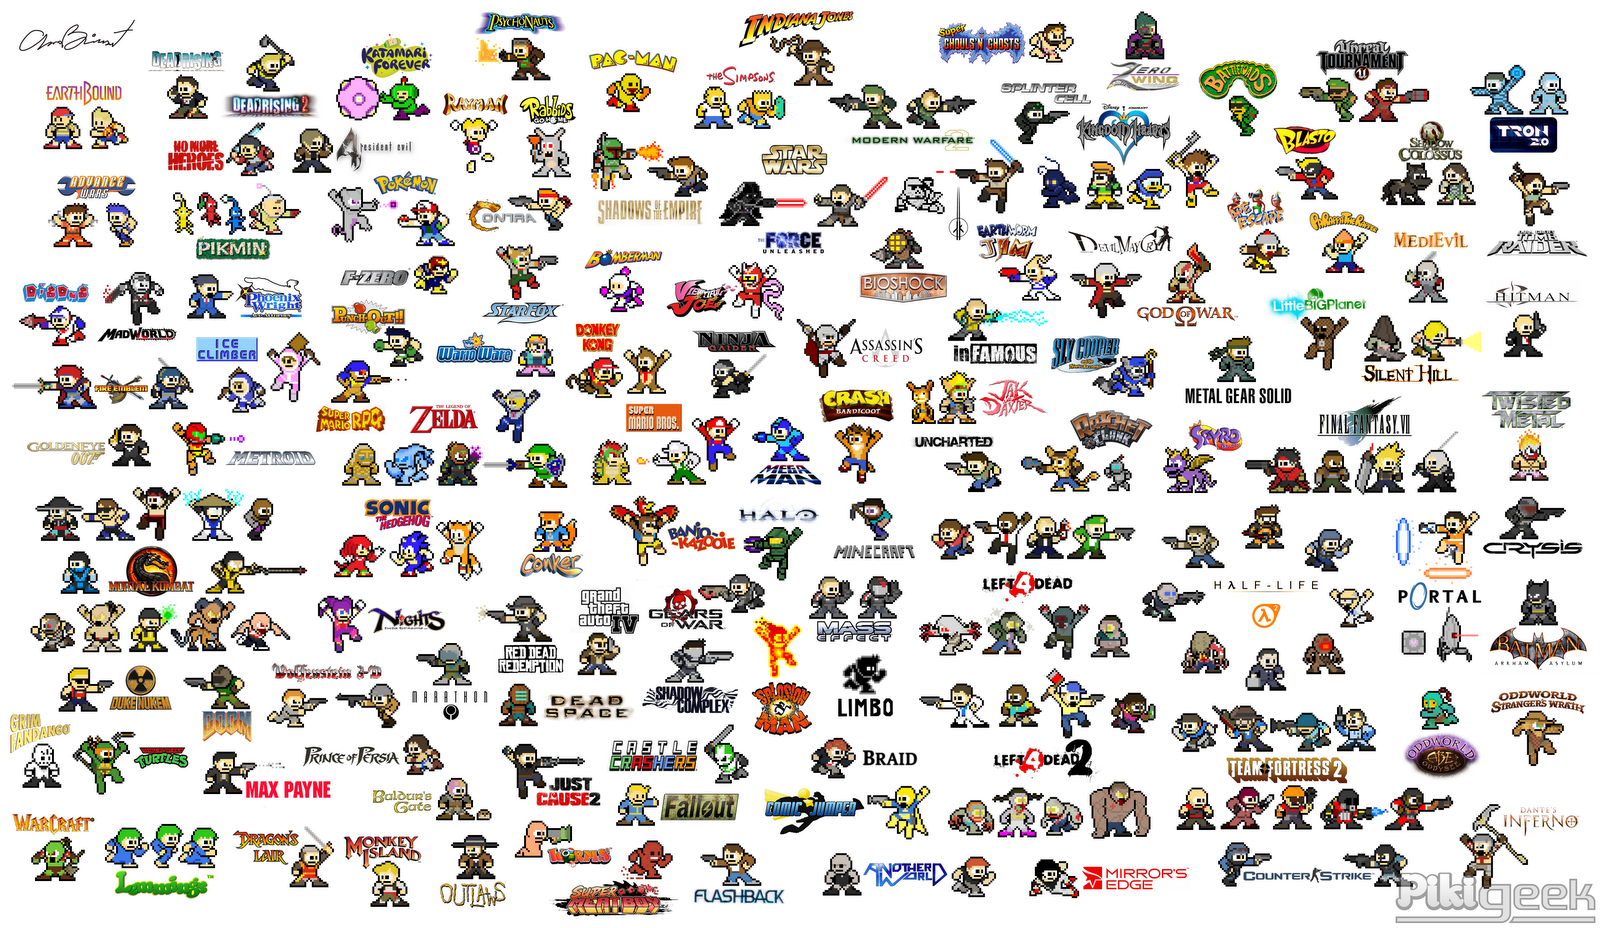 Mega Man Vs. Every Big Names (And Some Not-So-Big Ones) In Gaming